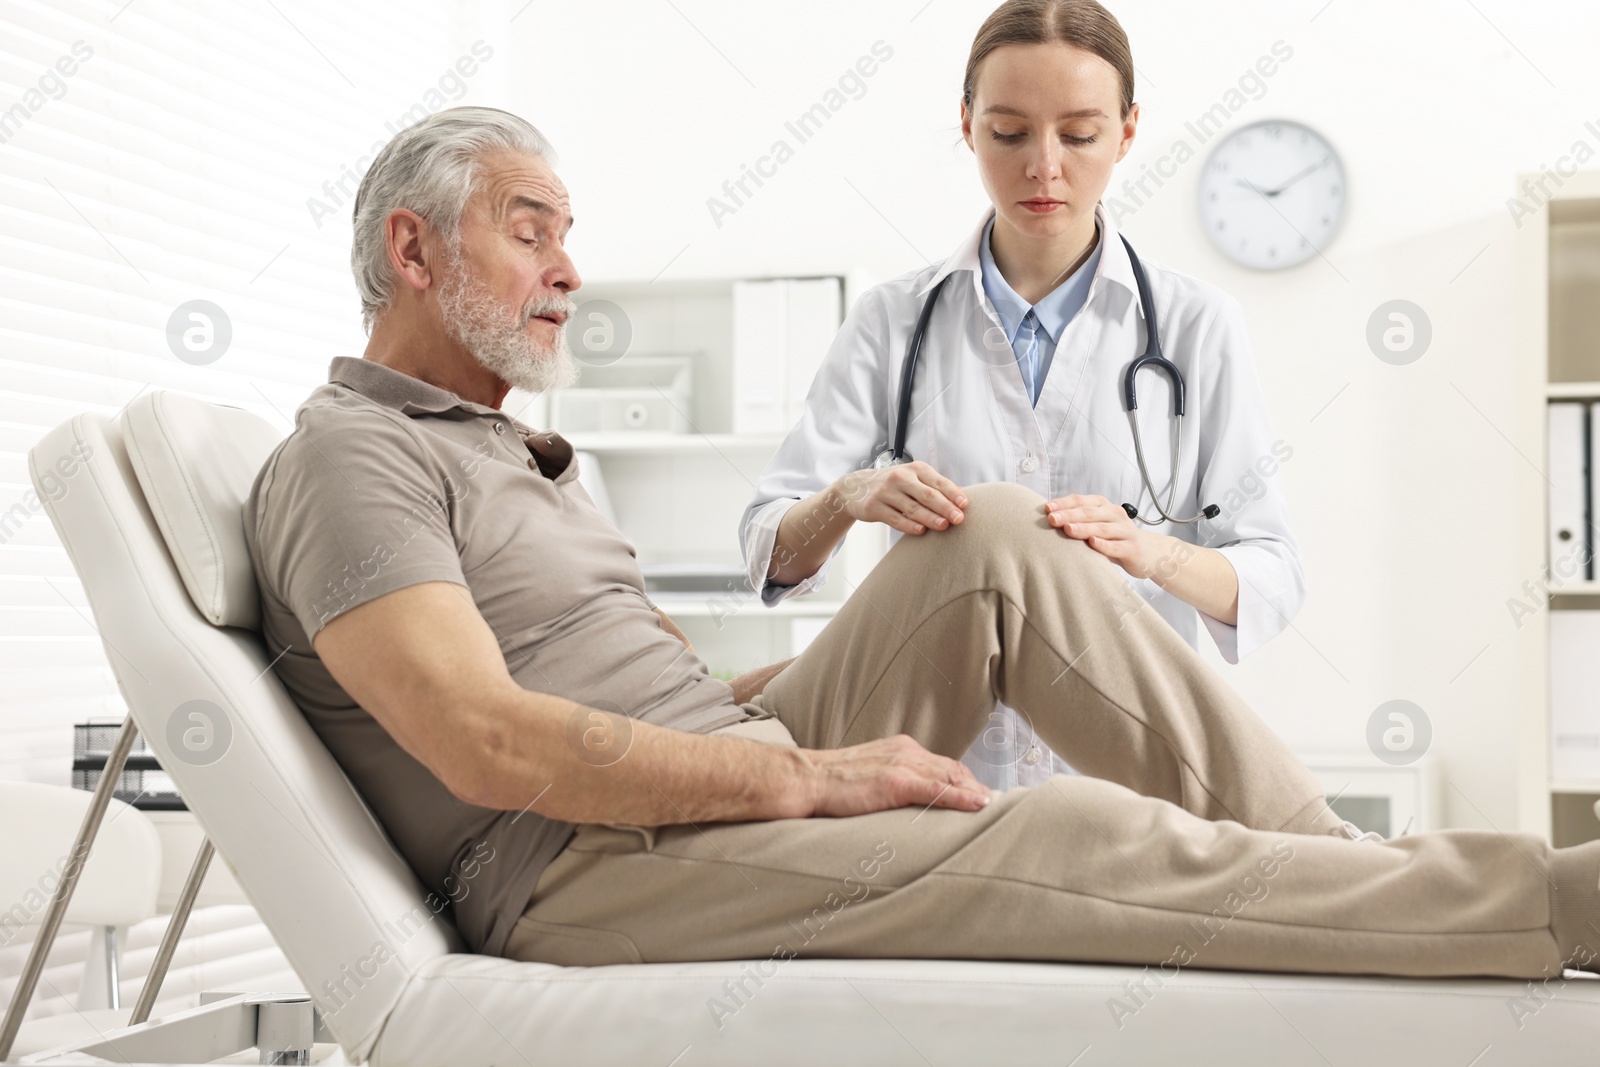 Photo of Arthritis symptoms. Doctor examining patient with knee pain in hospital